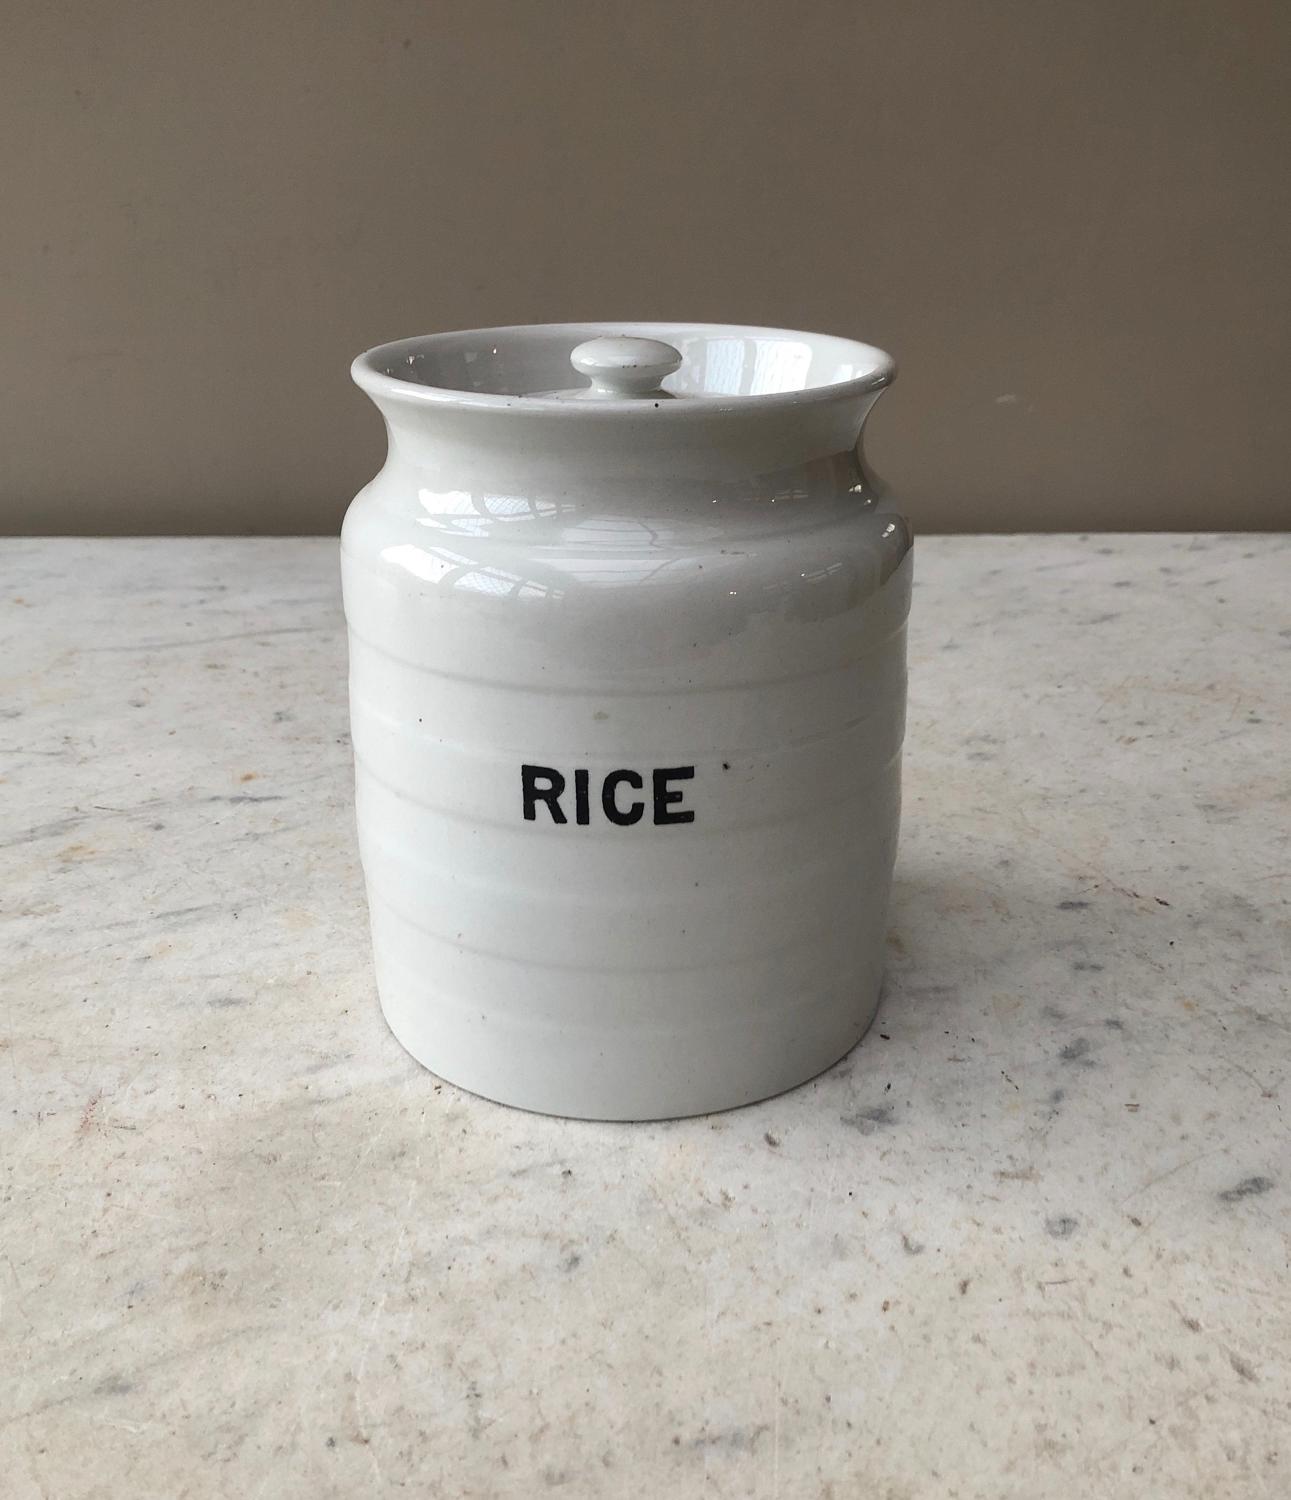 Early 20th Century White Banded Kitchen Storage Jar - Rice